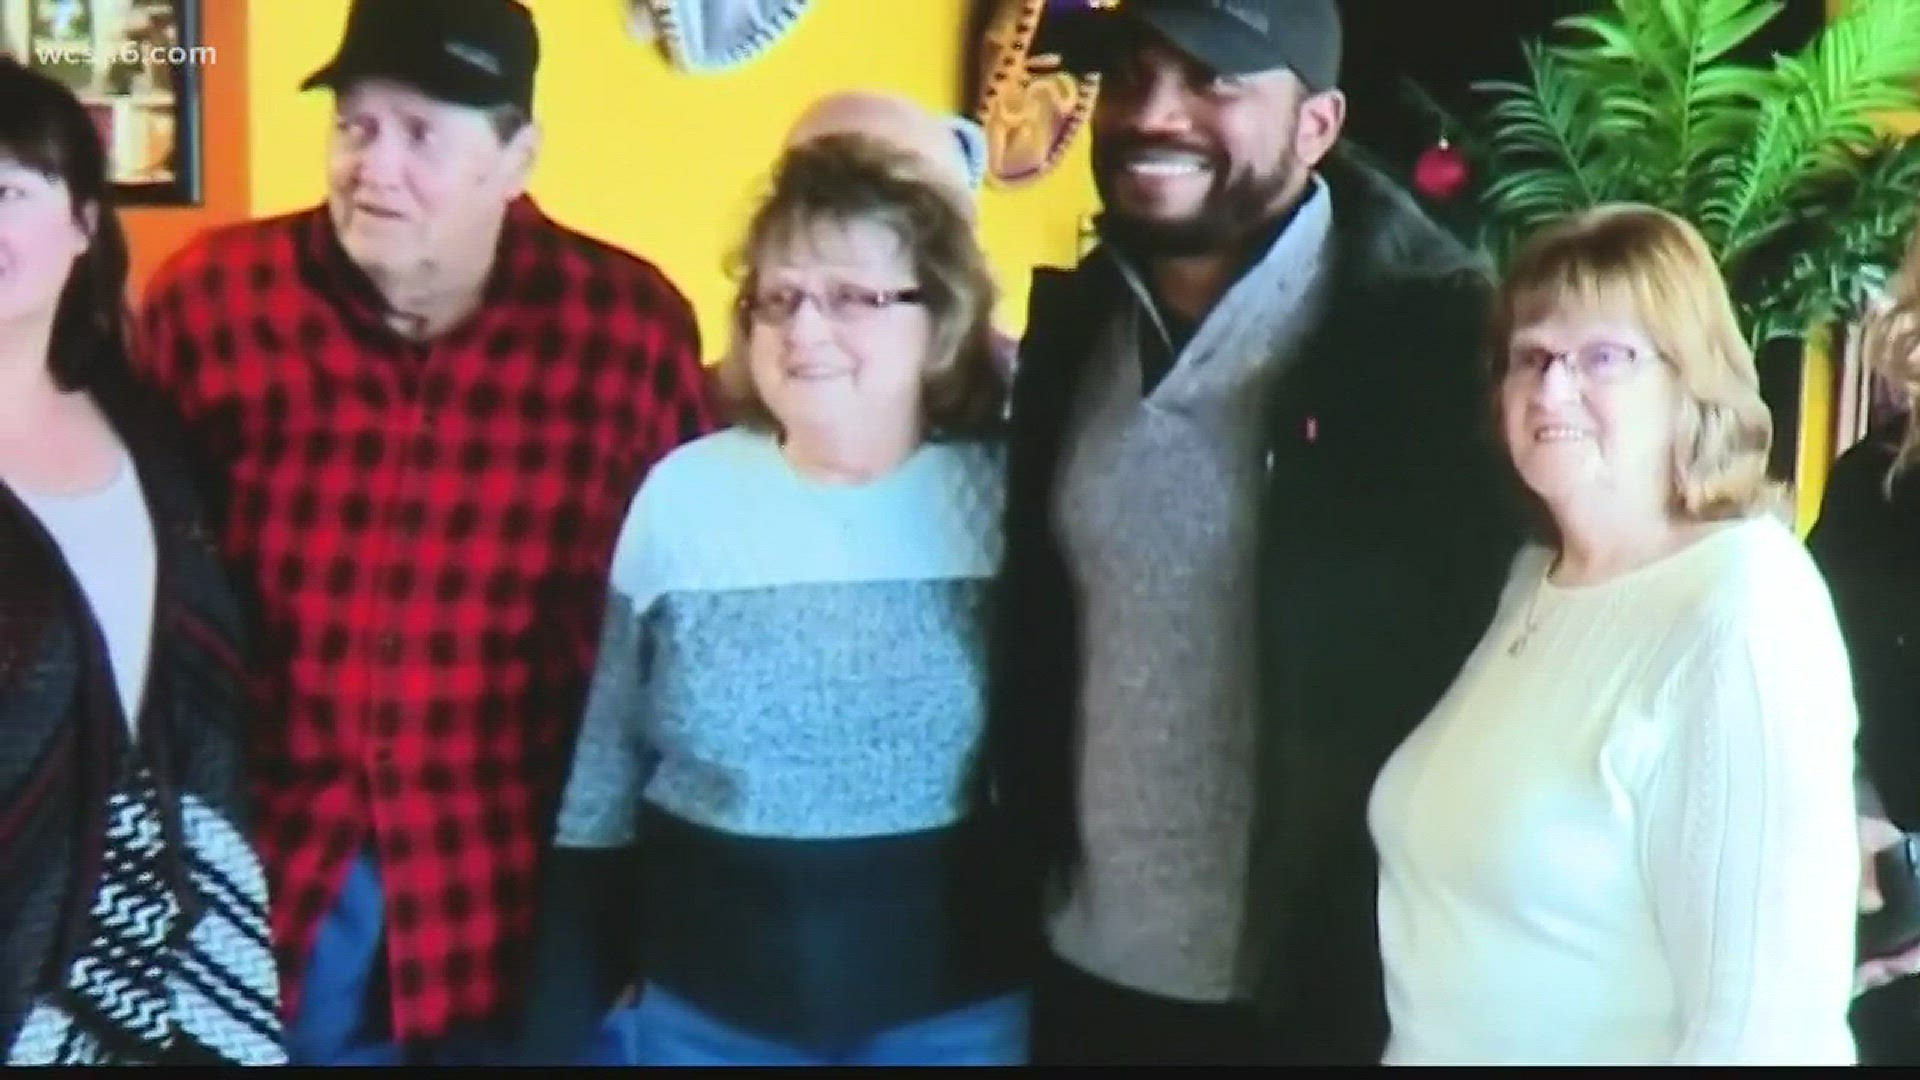 The appreciation was mutual at a meeting of a Country music star and the man from Lewiston who listened to his music to get through a seven-month hospital stay